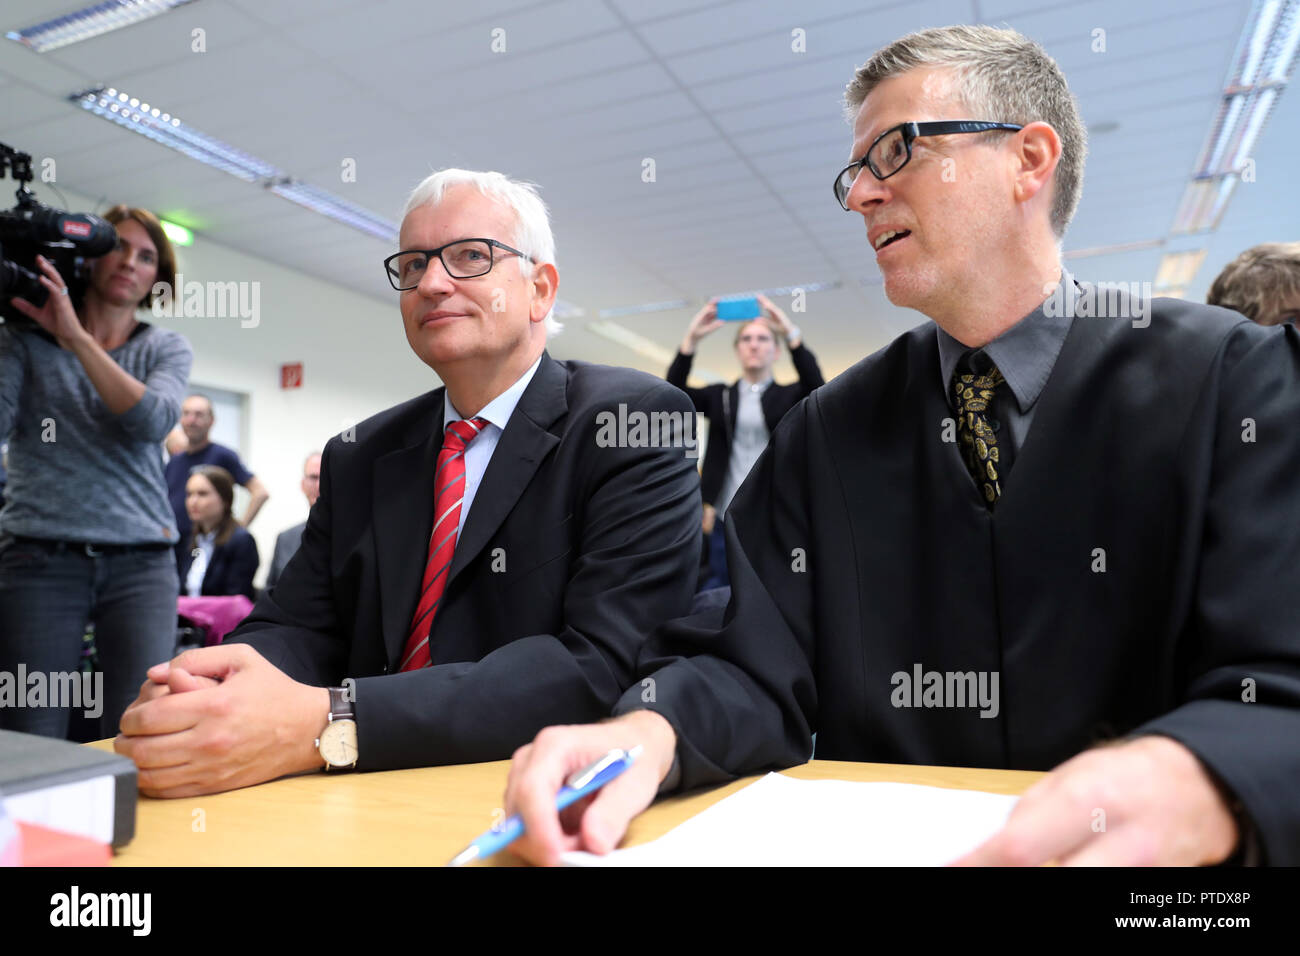 09 October 2018, Berlin: Jürgen Resch (l), the Federal Managing Director of Deutsche Umwelthilfe (DUH), sits in the Administrative Court room next to the lawyer Peter Kremer before the start of the oral hearing. The court is negotiating possible diesel driving bans in the capital. On many streets in Berlin the limit value for harmful nitrogen dioxide is exceeded. Photo: Jens Büttner/dpa-Zentralbild/dpa Stock Photo